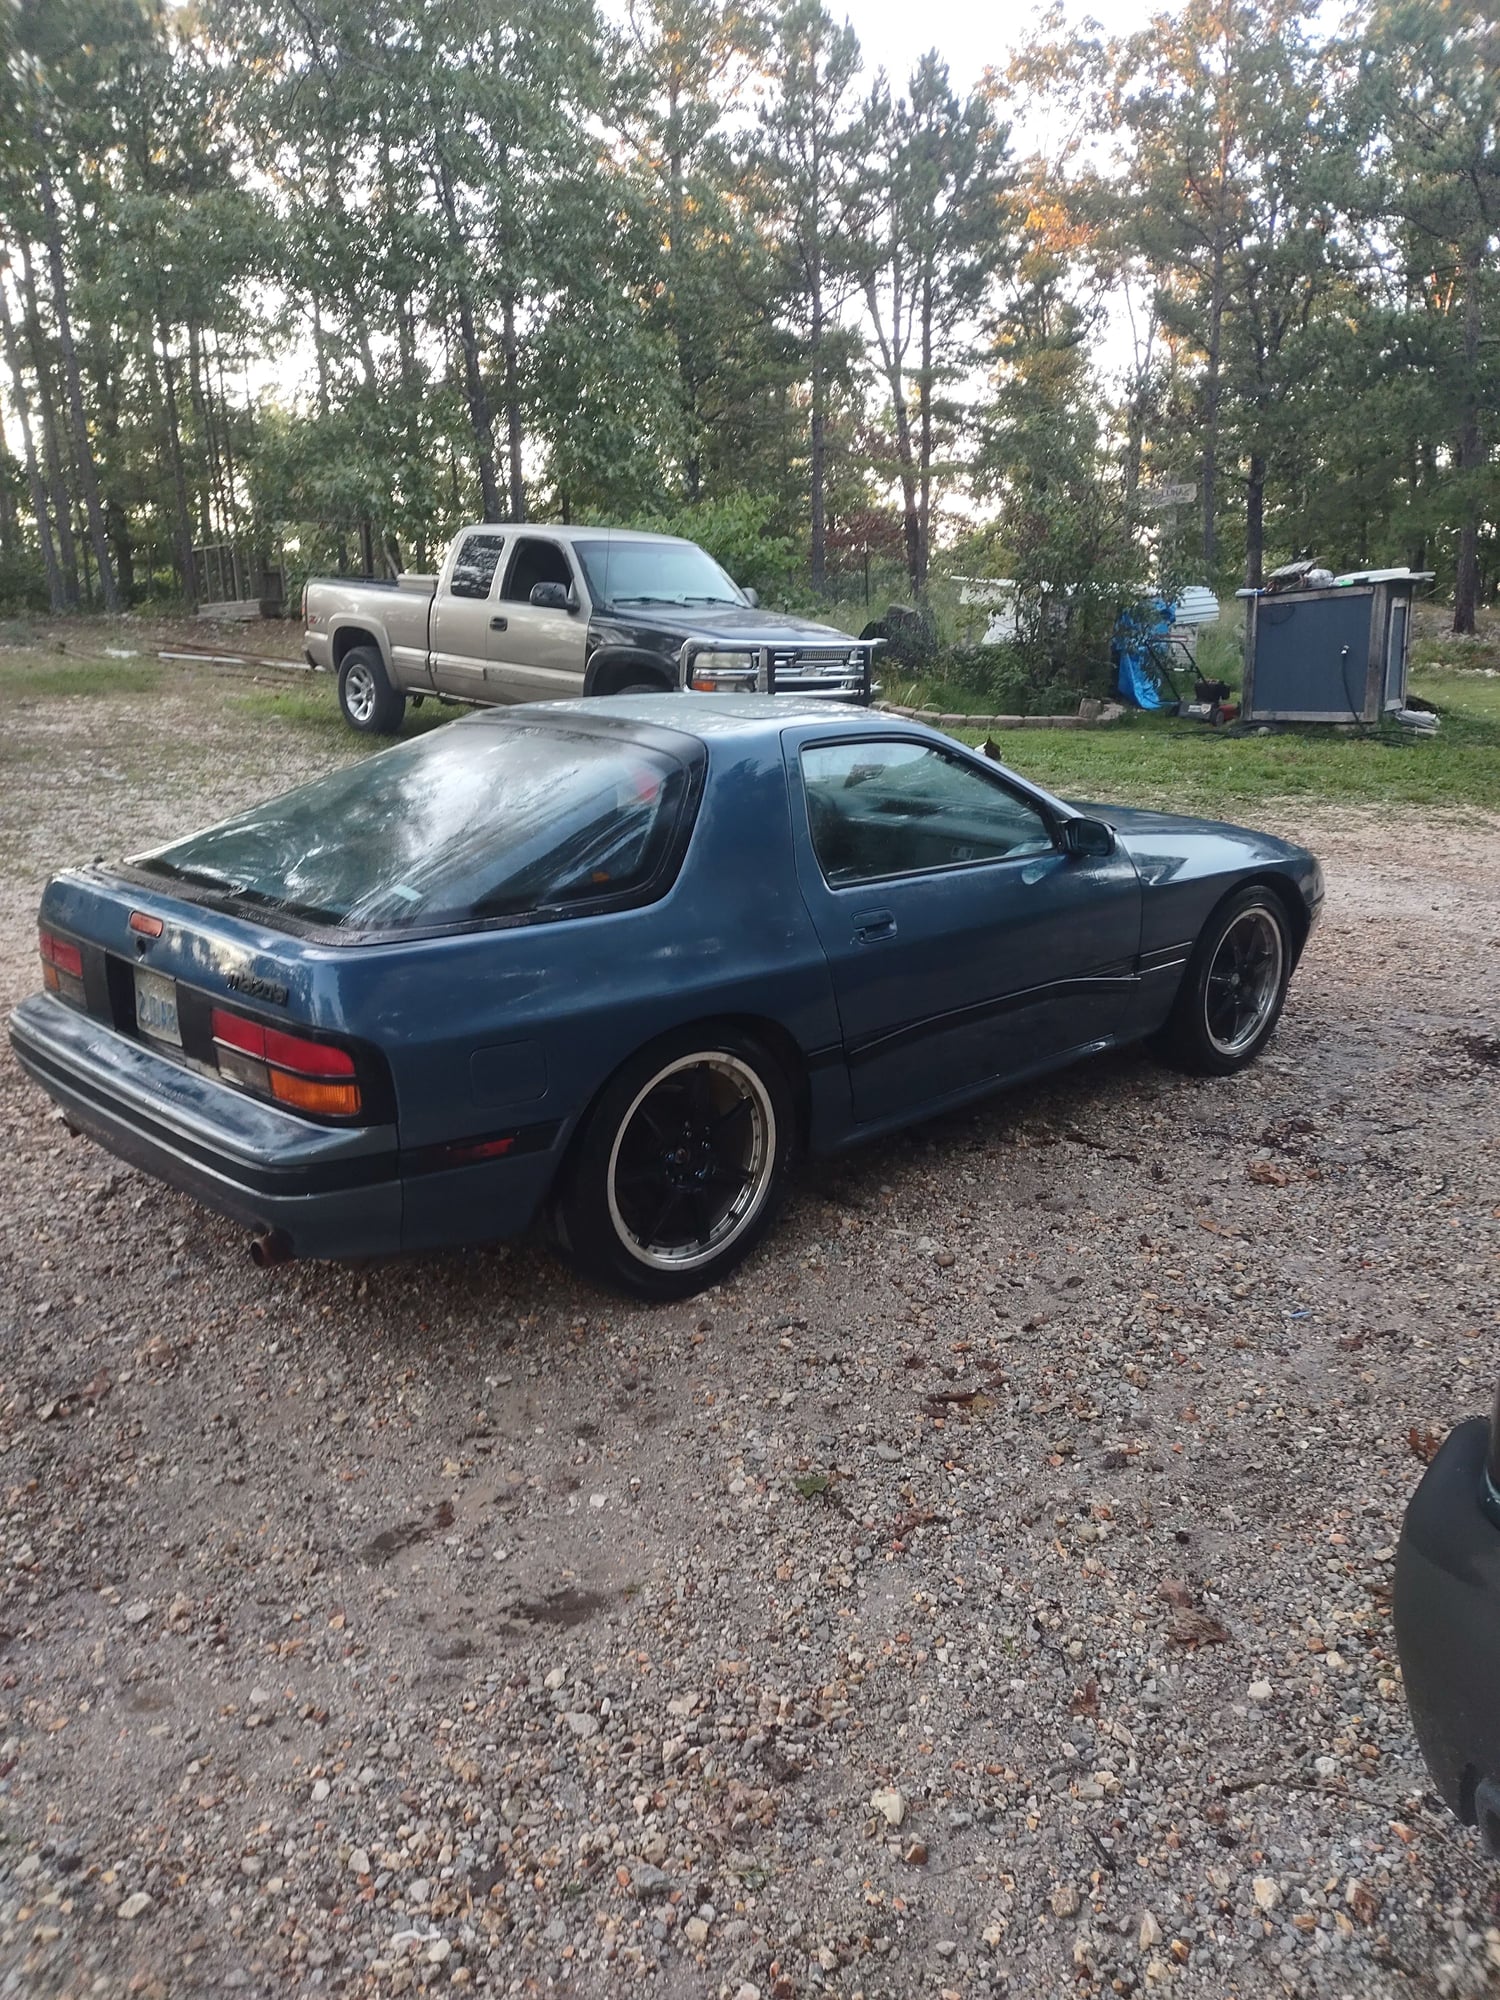 1988 Mazda RX-7 - 1988 gxl - Used - VIN Serious buyers - 148,000 Miles - Other - 2WD - Manual - Coupe - Blue - Willow Springs, MO 65793, United States